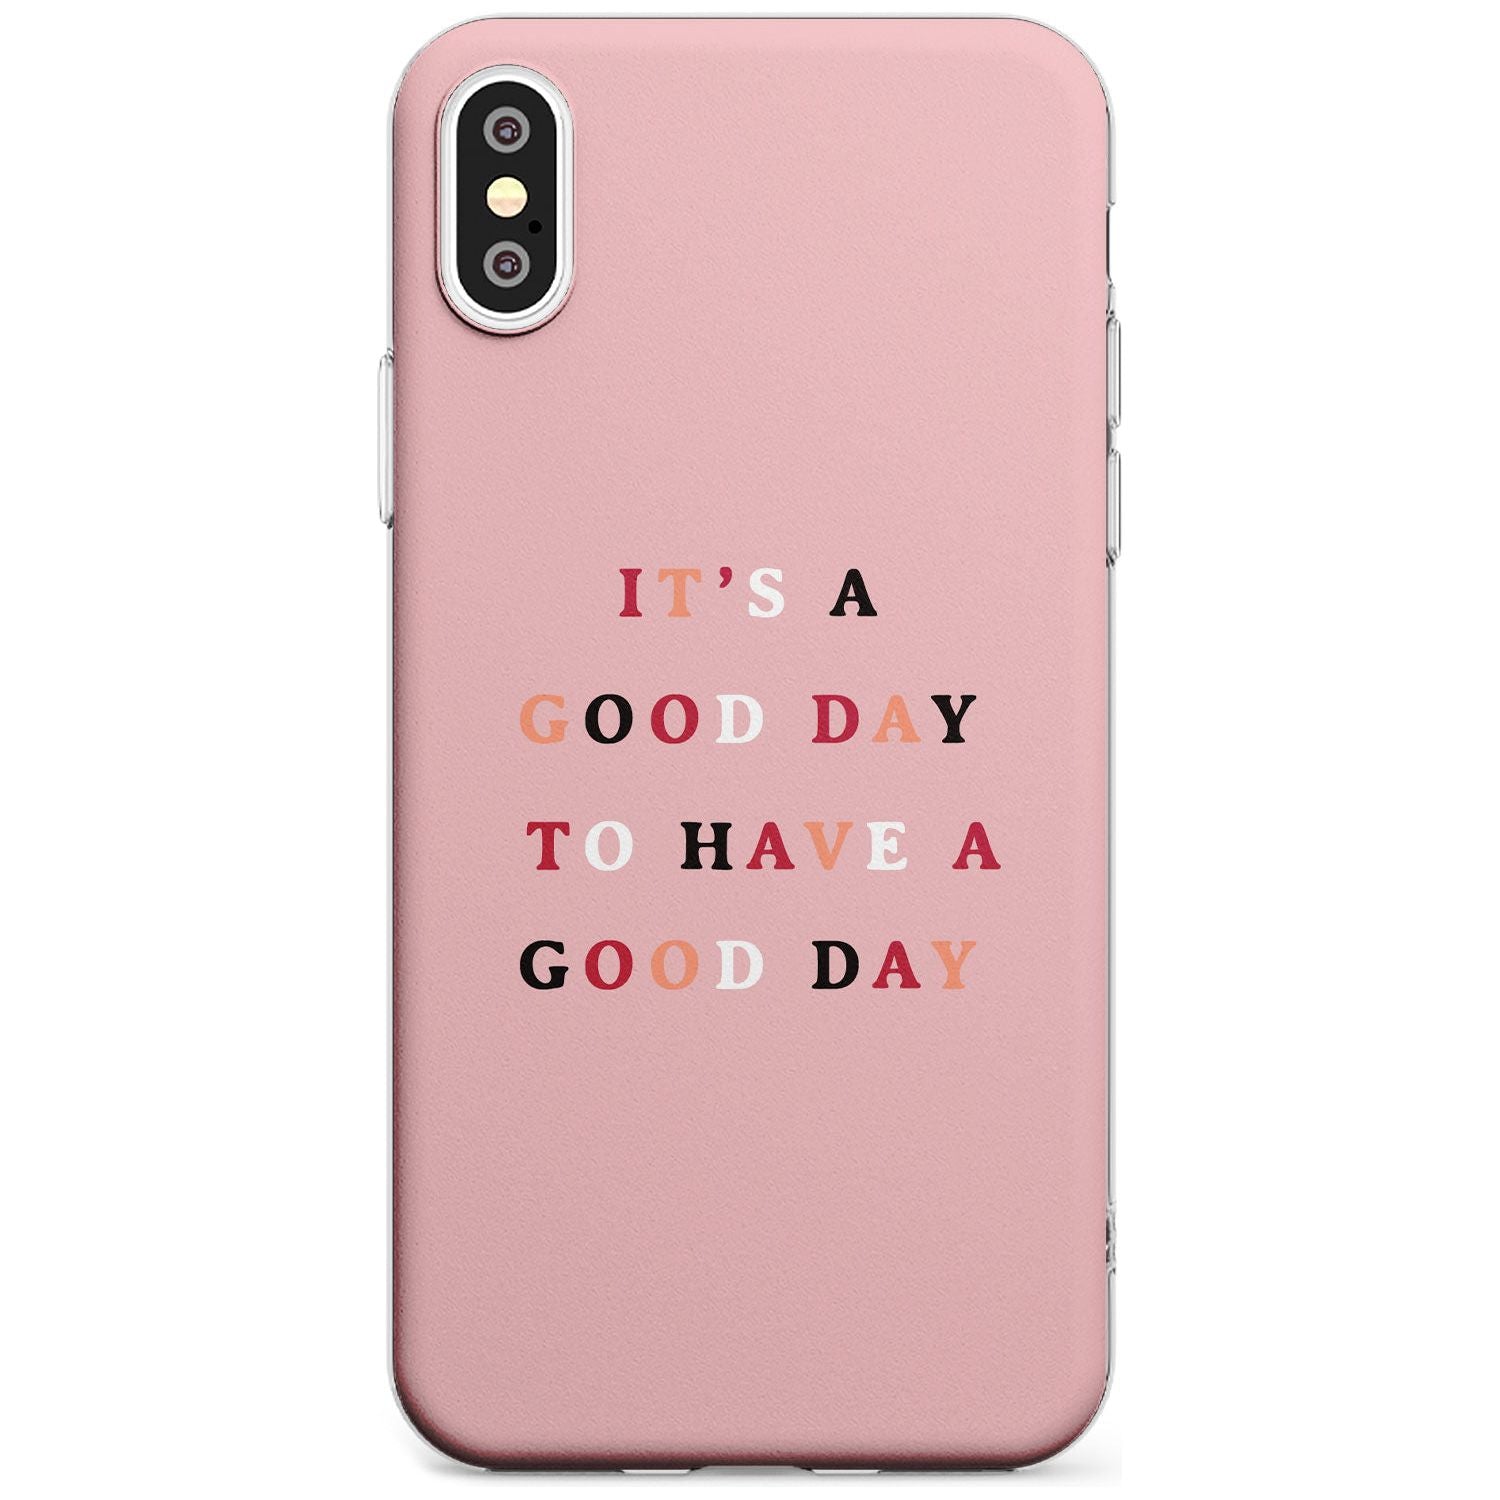 It's a good day to have a good day Slim TPU Phone Case Warehouse X XS Max XR